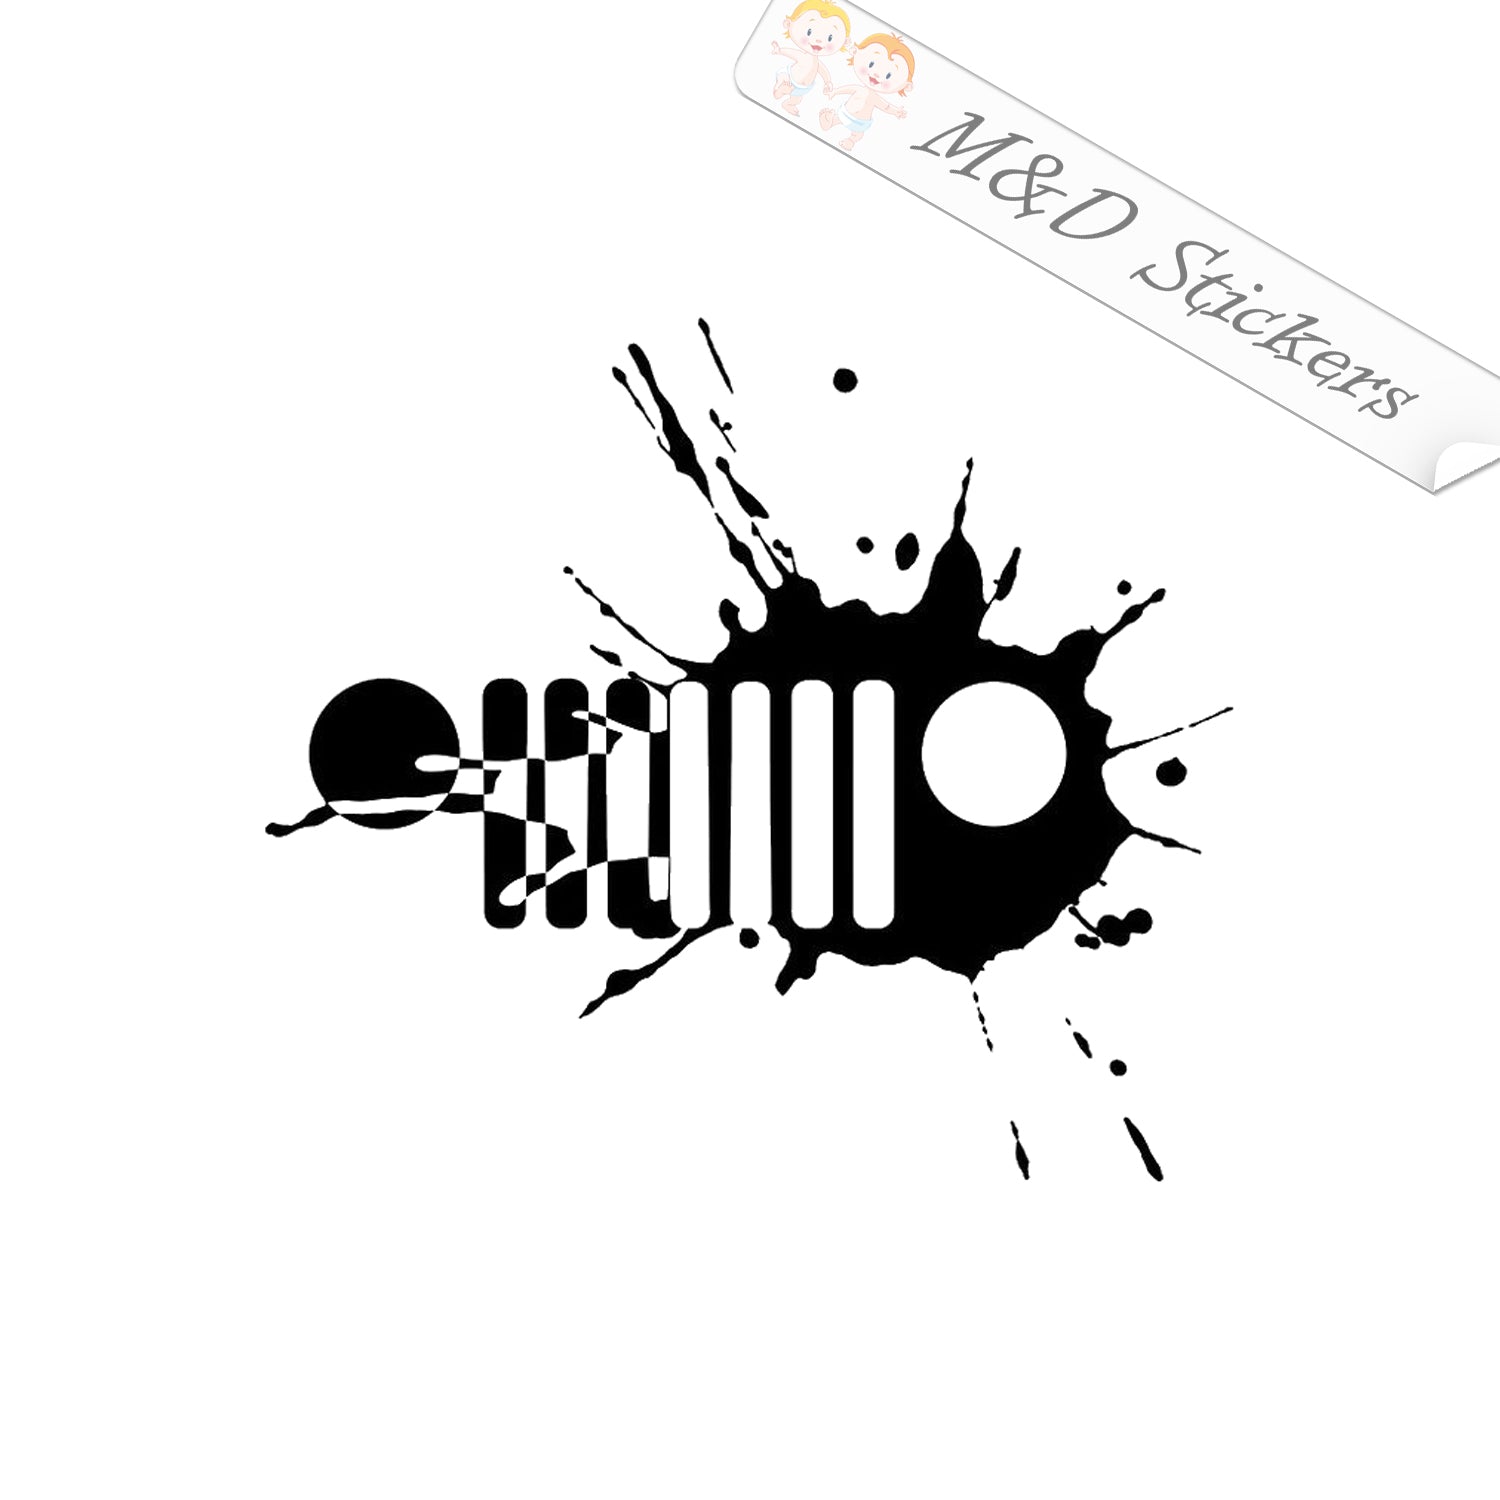 Boob Bouncer Jeep Decal SVG